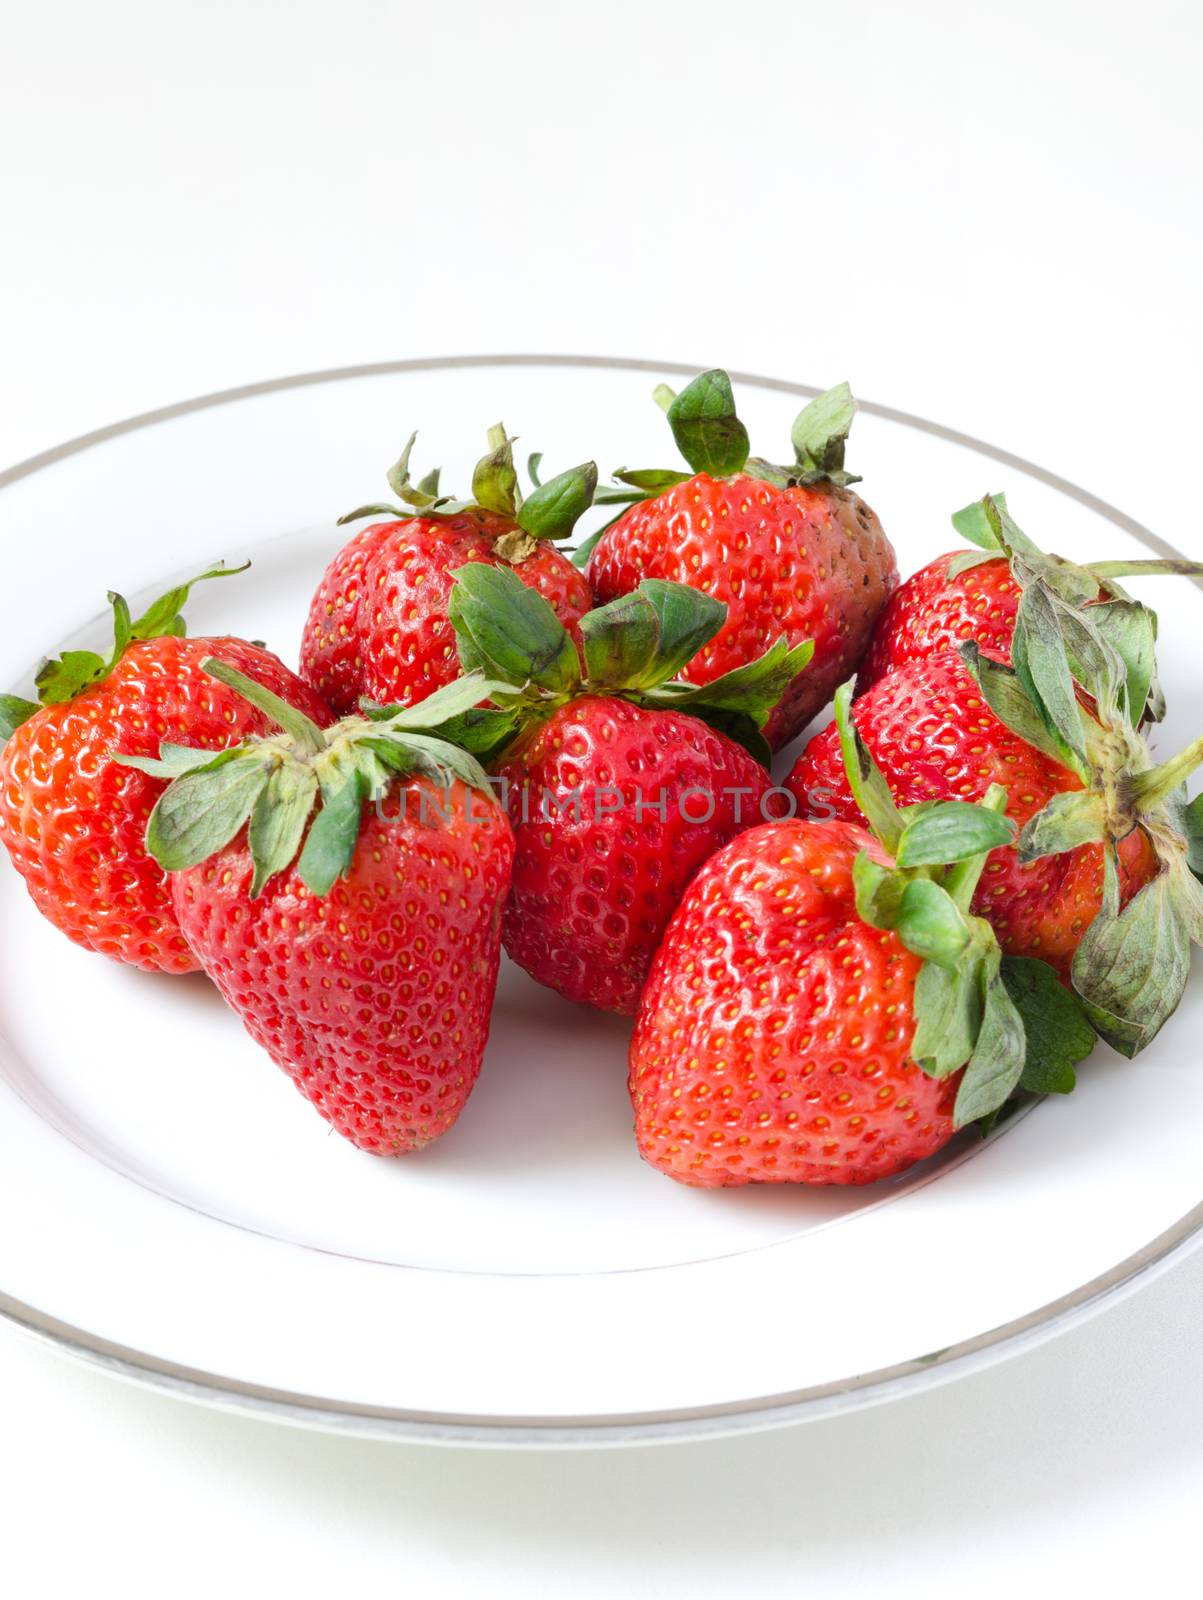 Ripe strawberries in a plate on white background